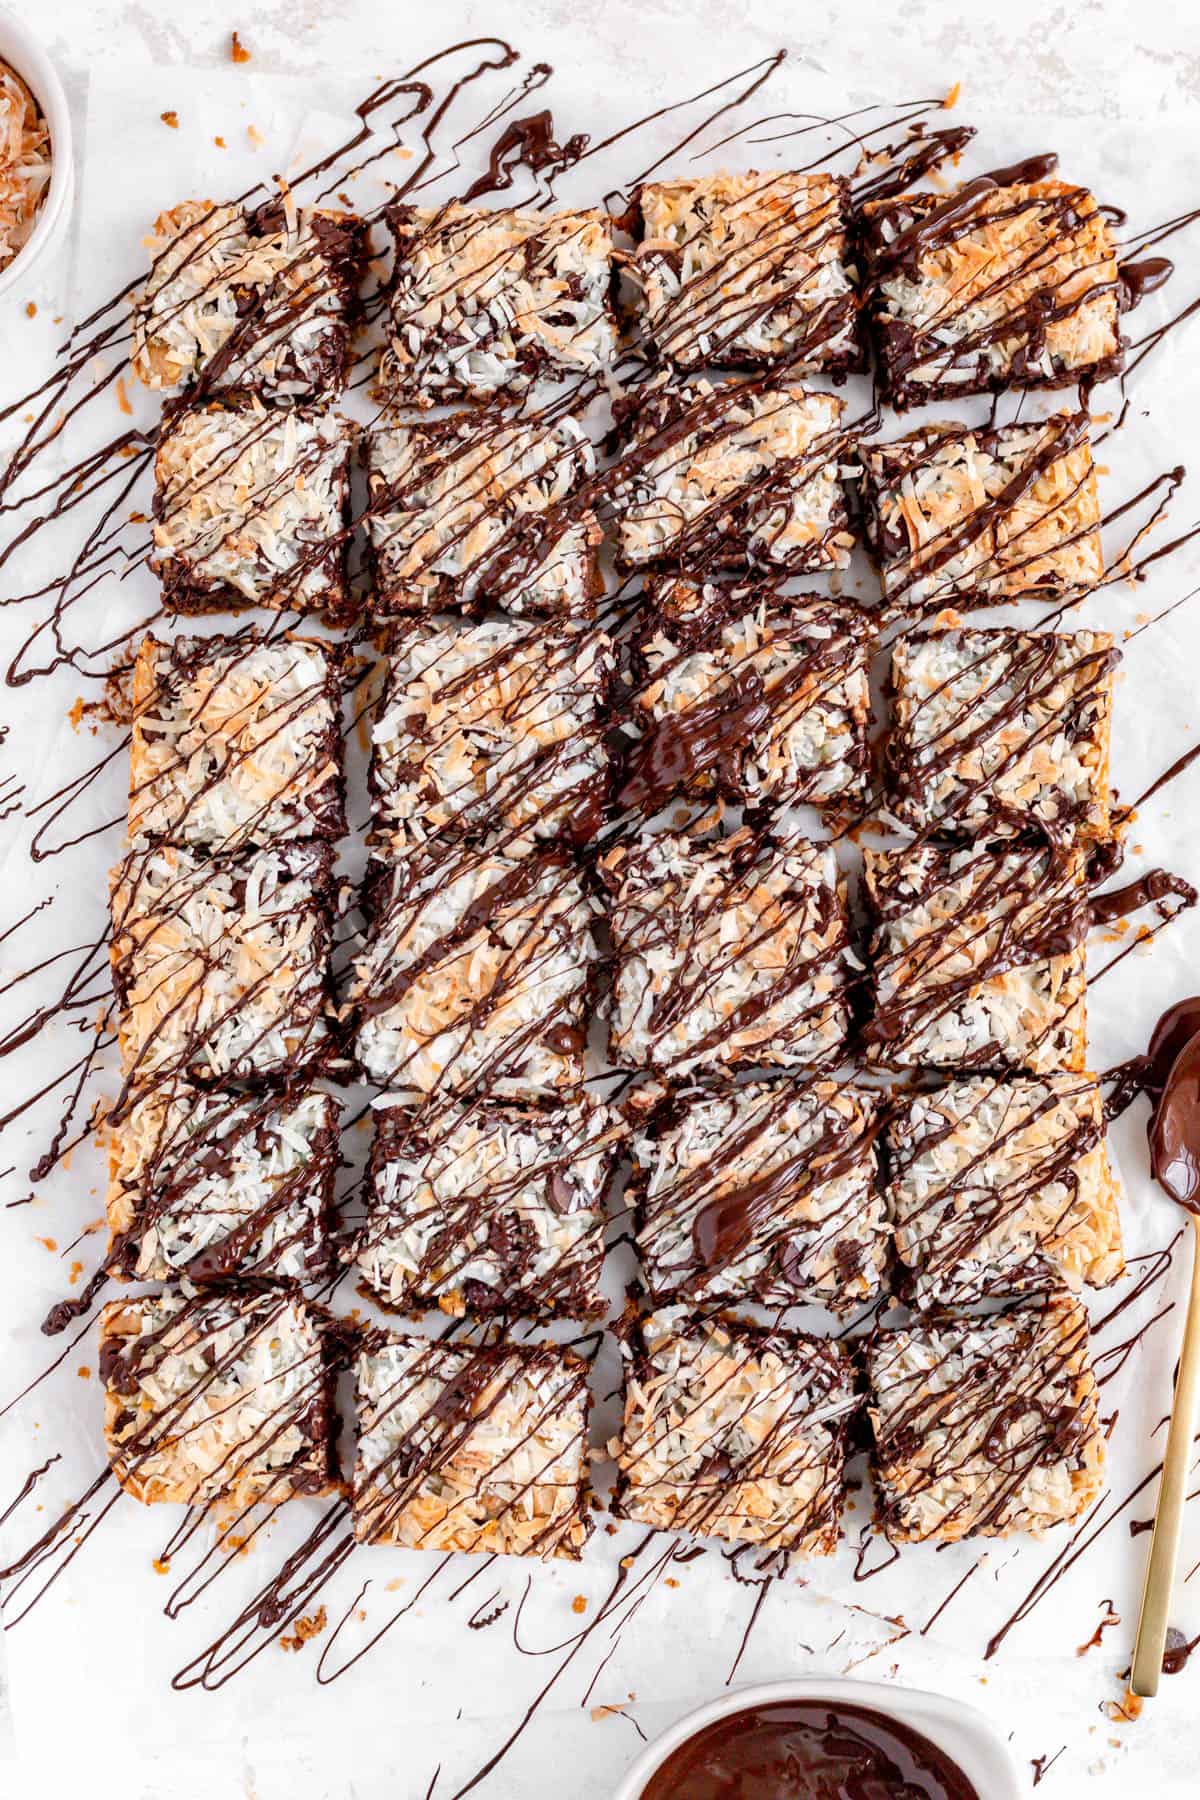 Overhead view of a full pan of chocolate drizzled magic bars with balls of ingredients on side